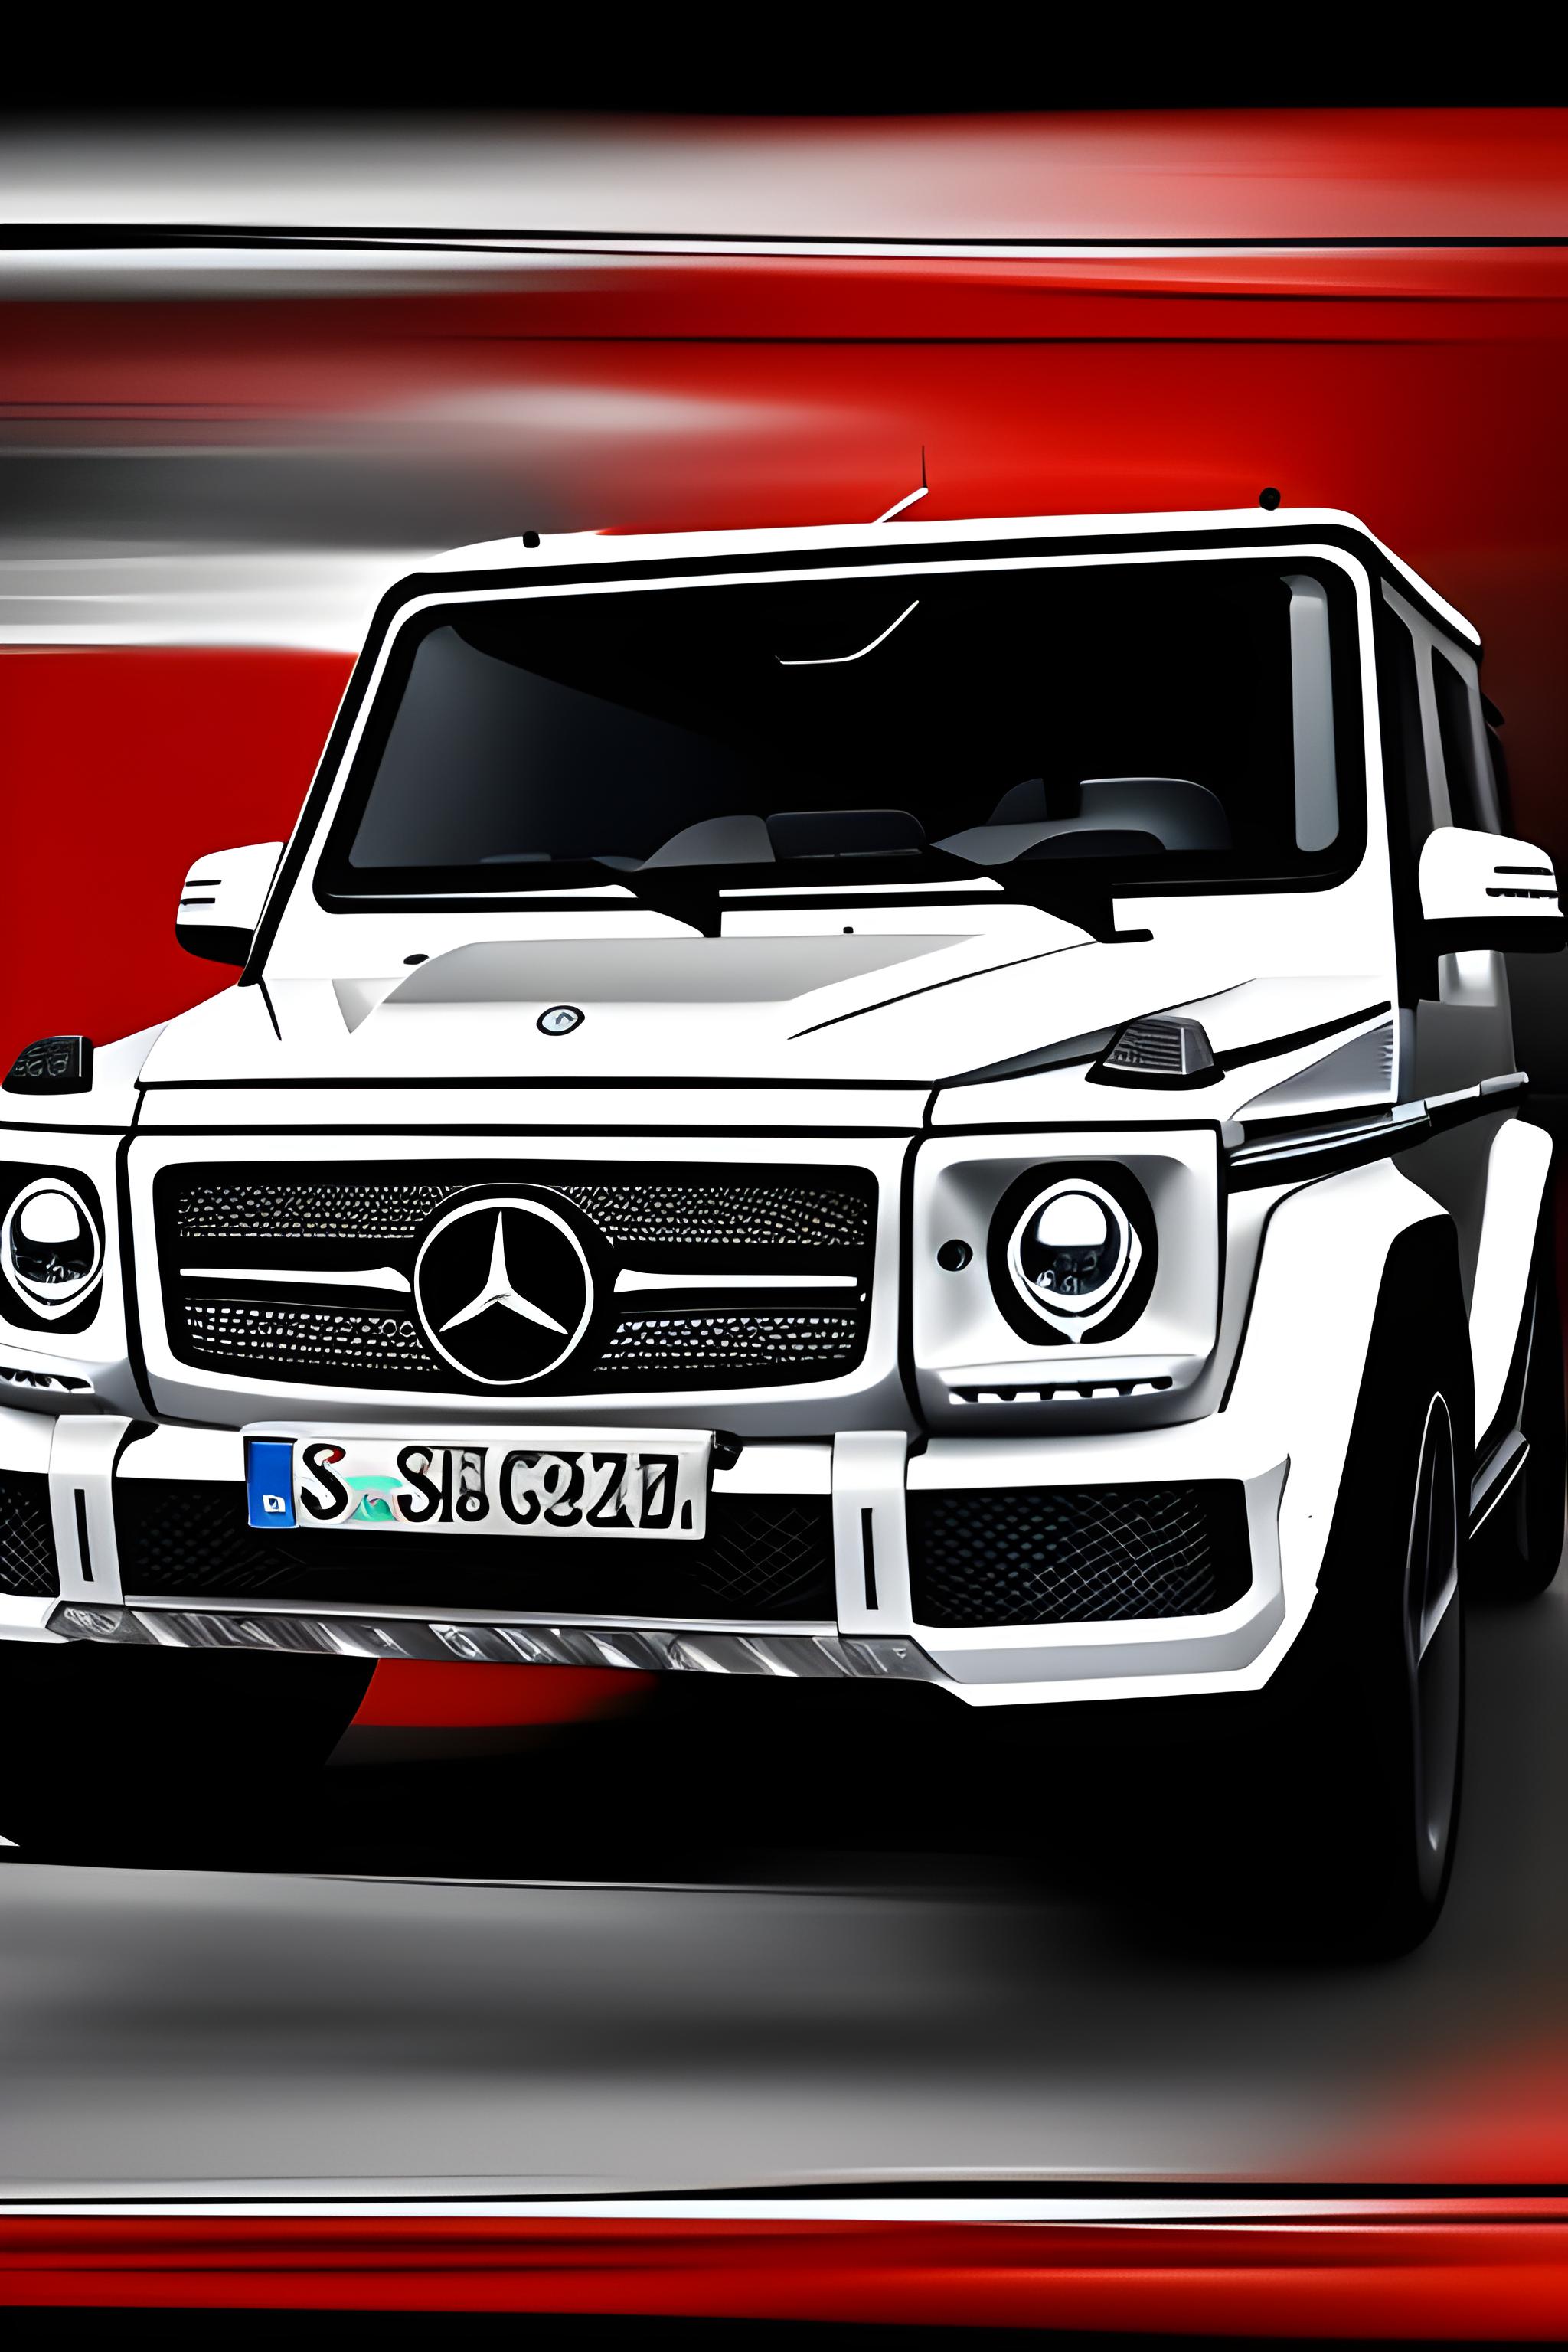 Mercedes G-Wagon and Ducati Panigale